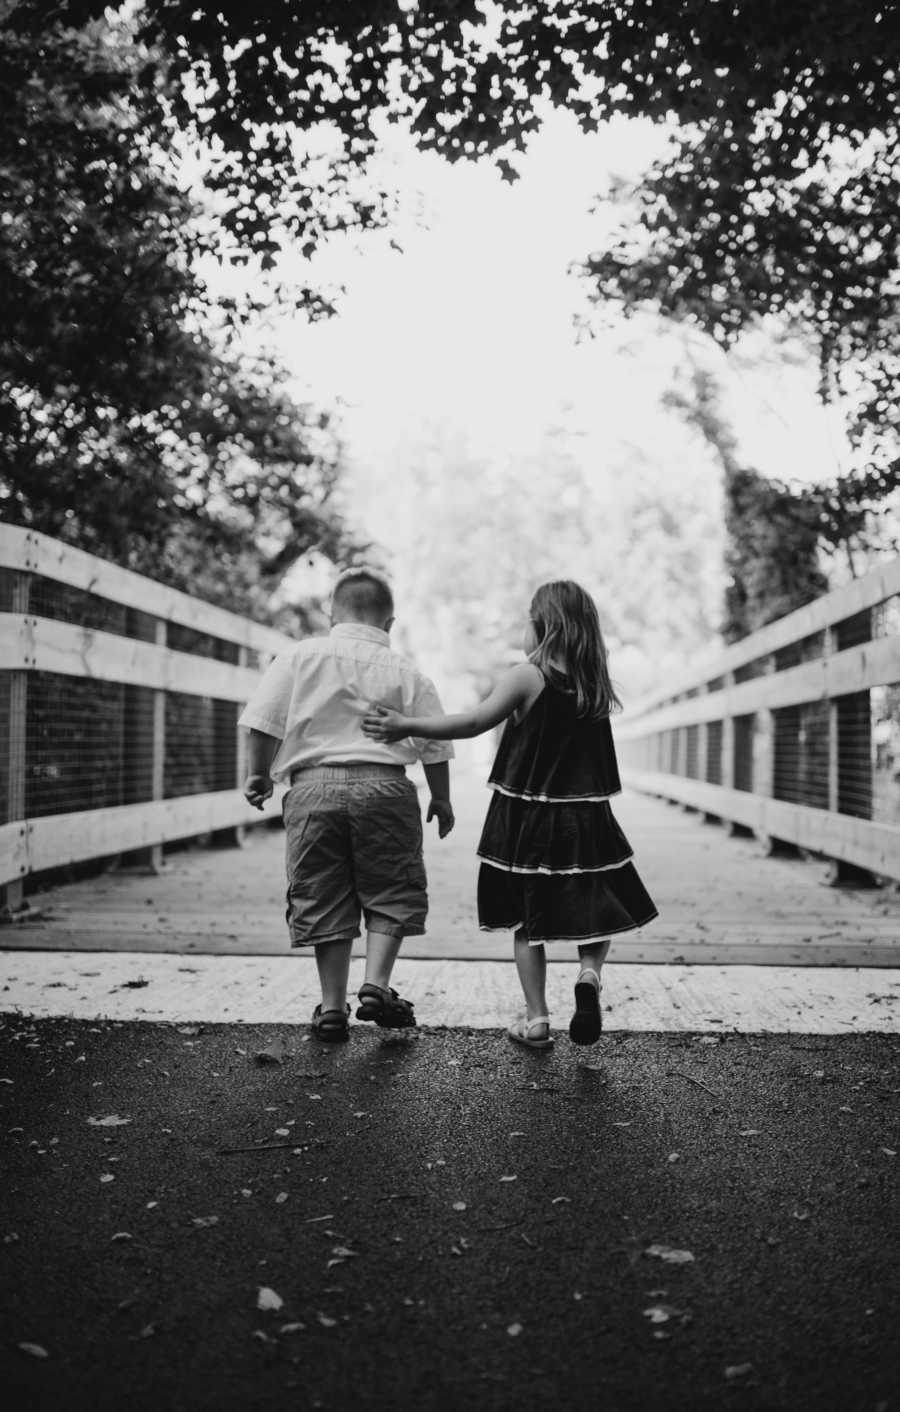 View from the back of down syndrome boy and girl walking on bridge